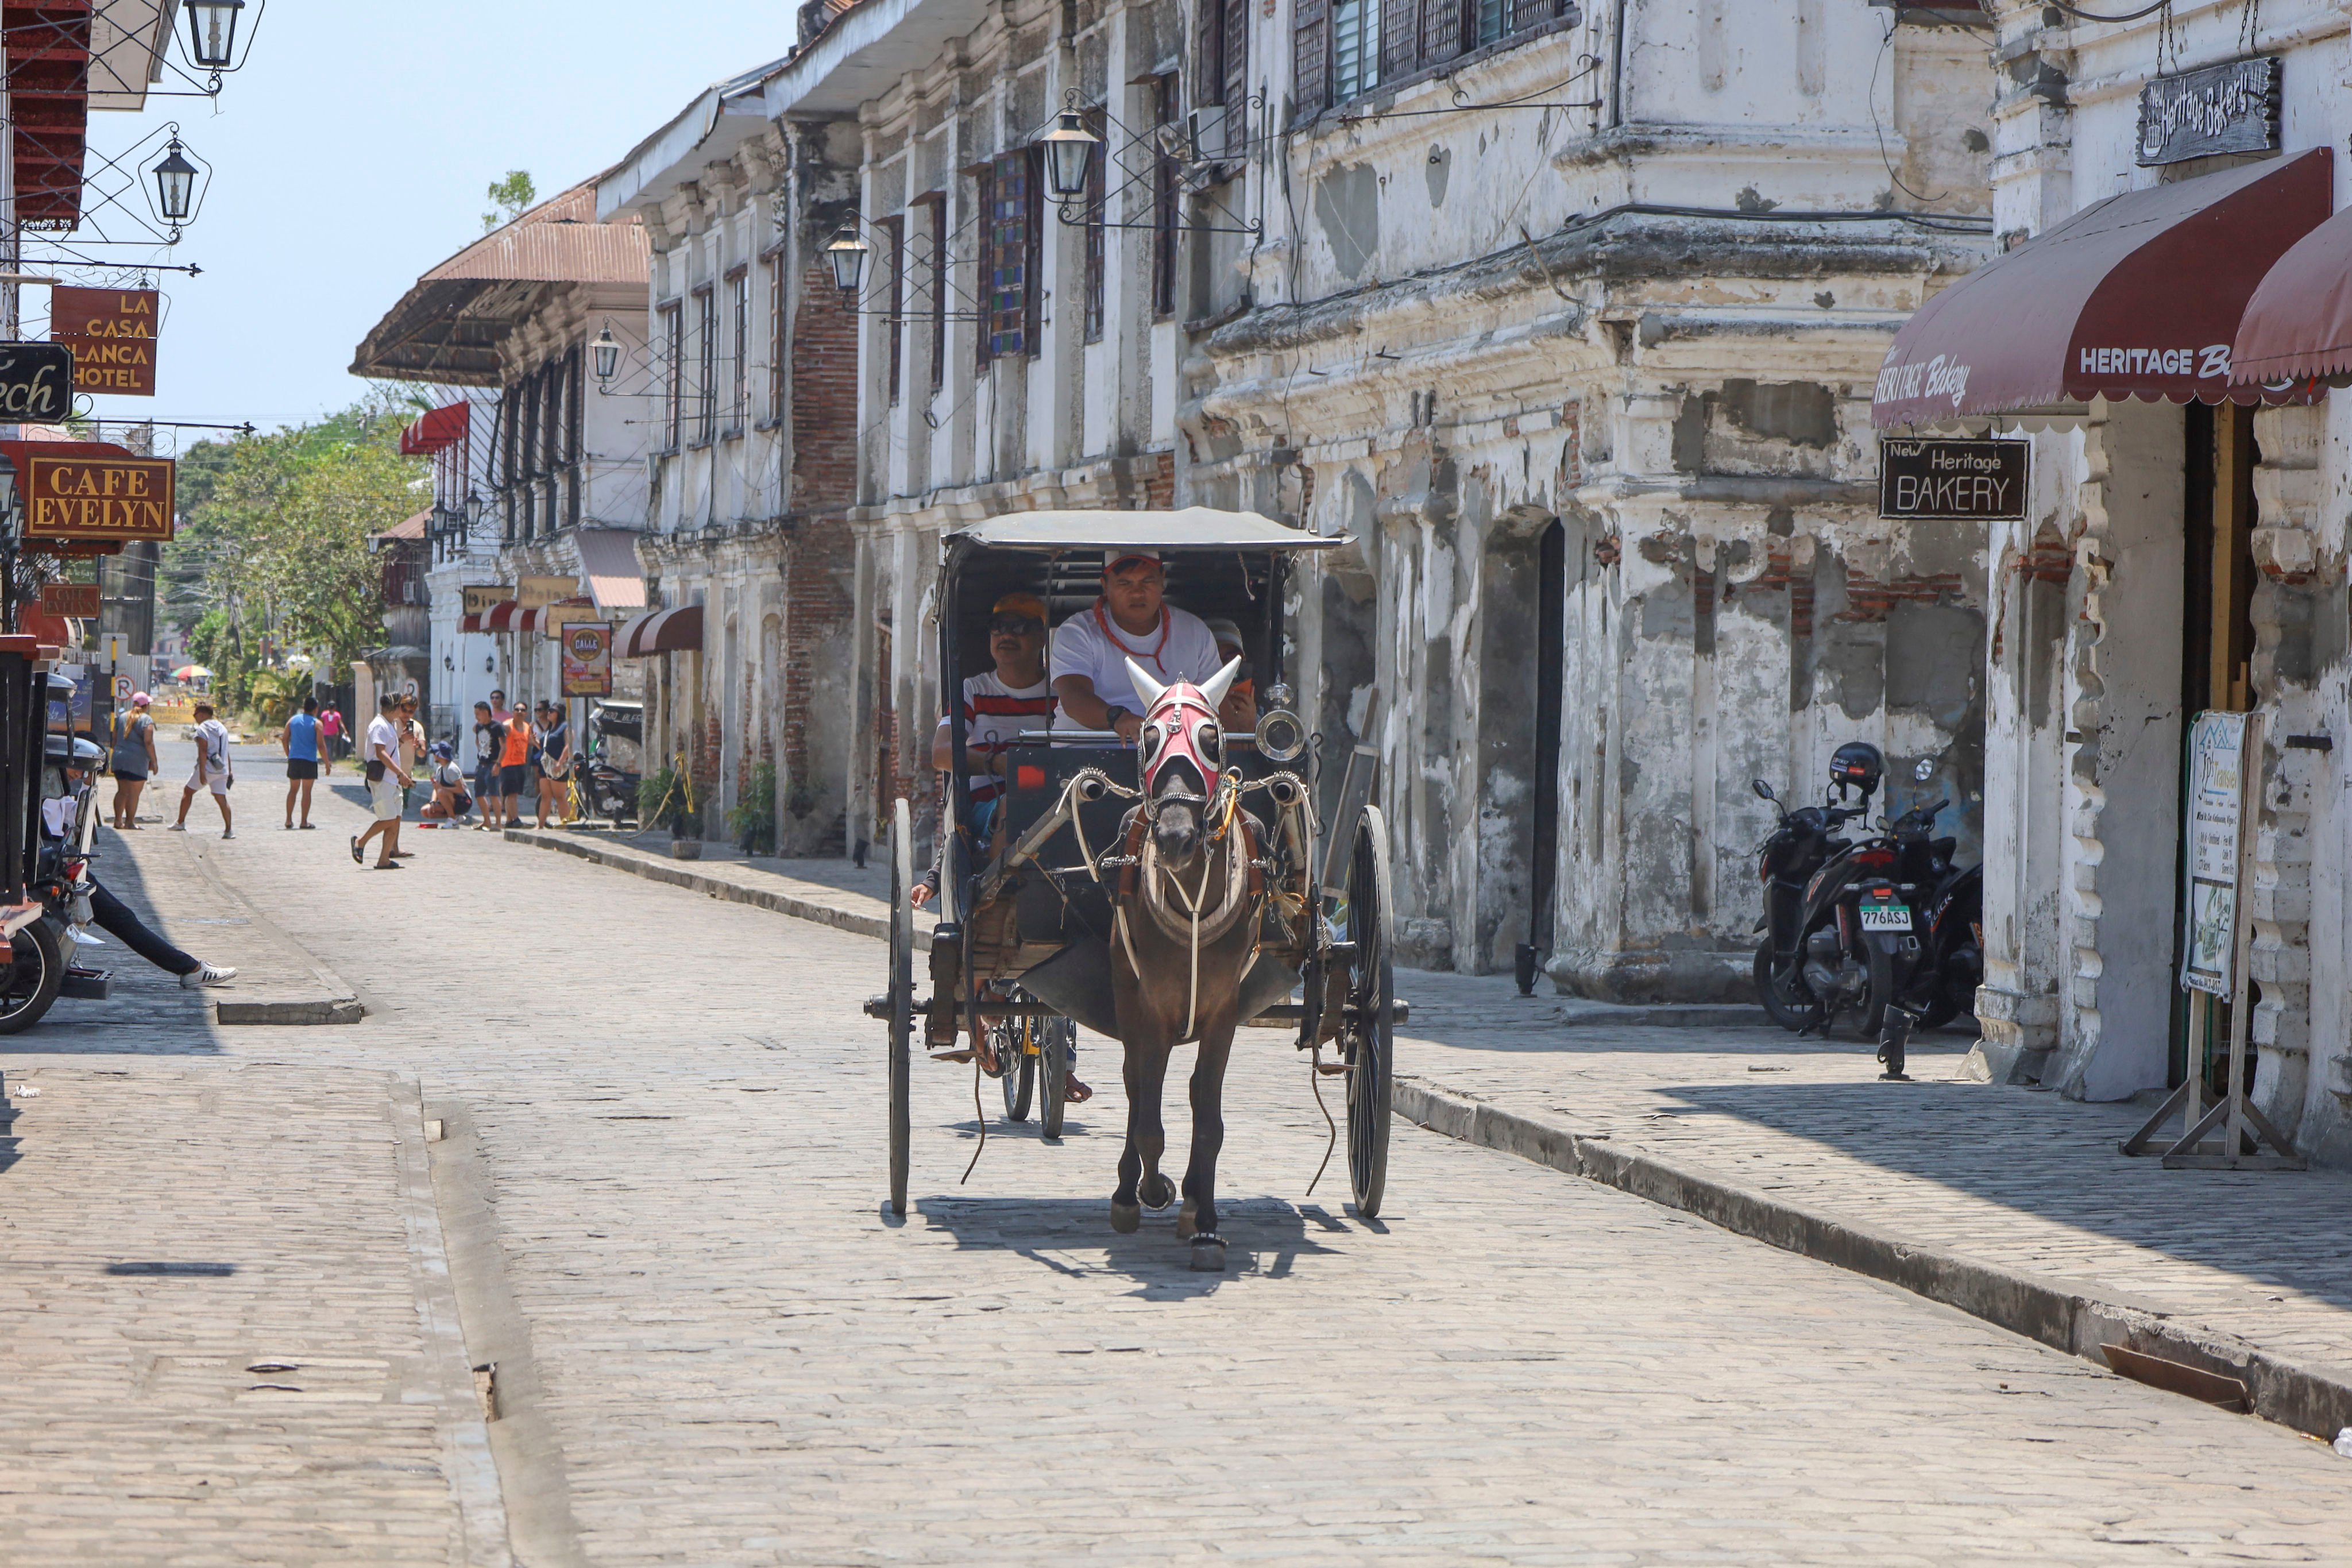 A horse-drawn kalesa on a street in Vigan, a city in the Philippines where hundreds of Spanish colonial buildings give a window into the past. Though much of the Philippines’ colonial material culture has been wiped out, there are still traces of it to be found in the islands’ historical areas. Photo: Thomas Bird